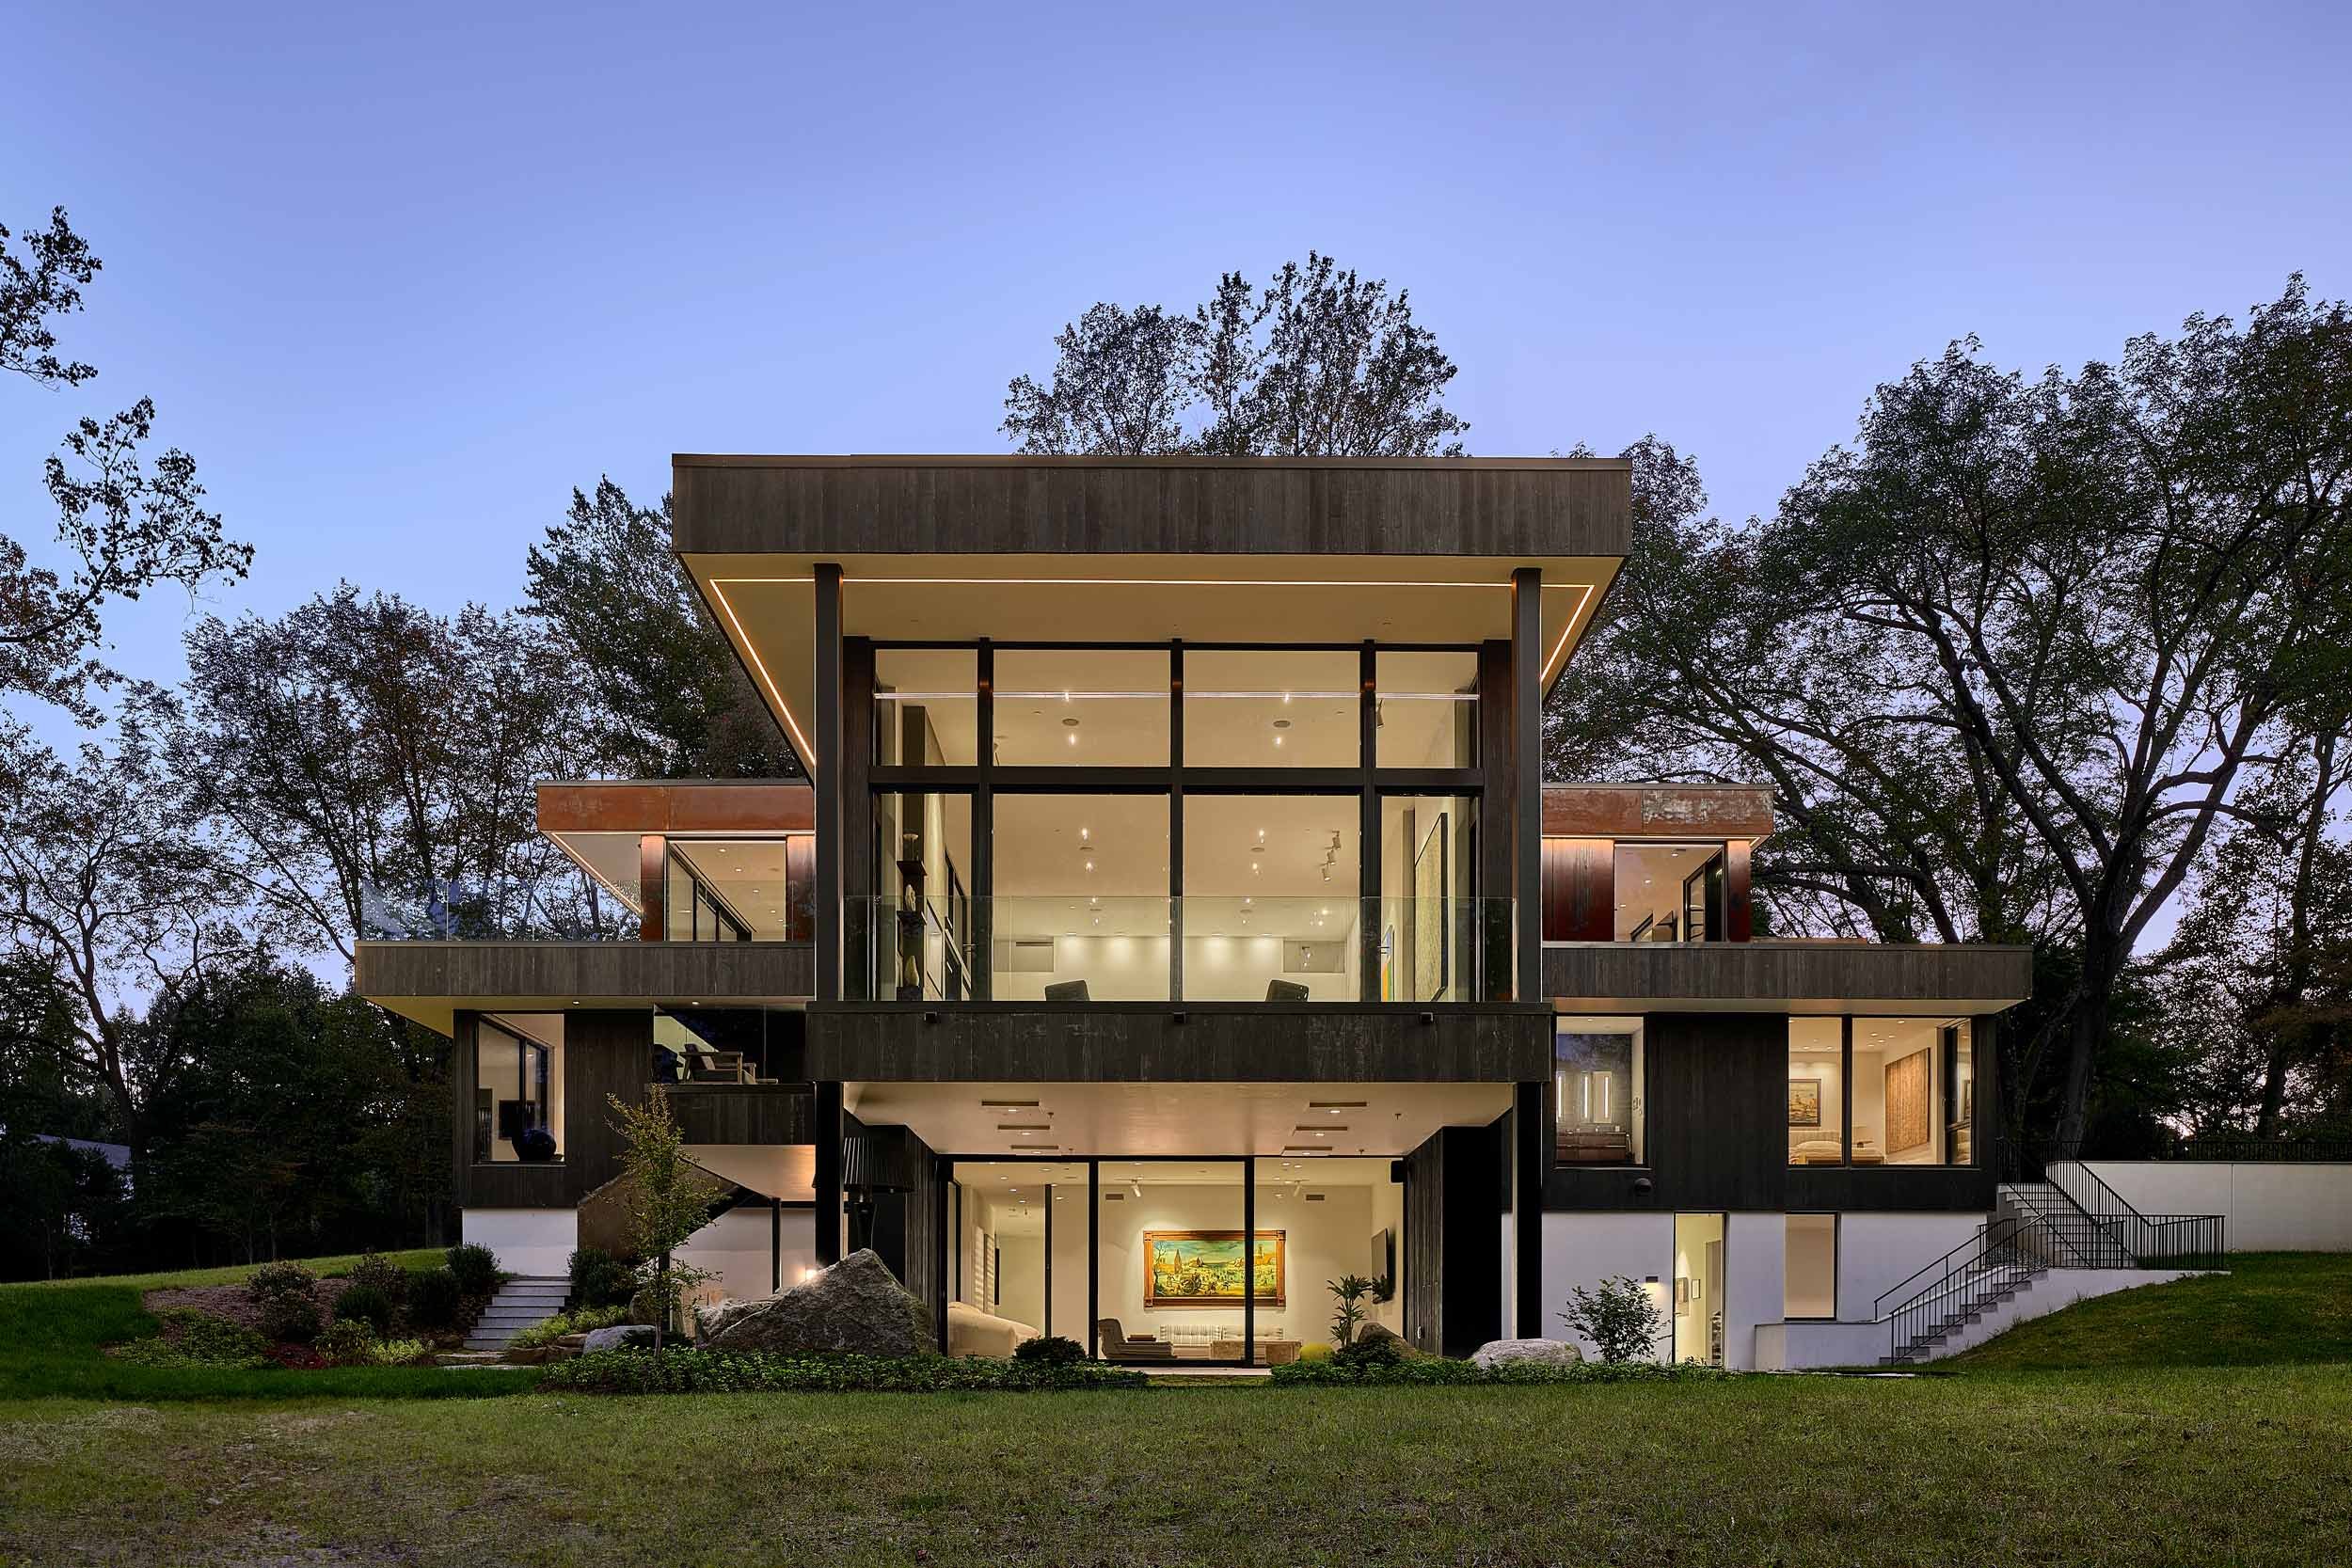  Private Residence Zen Design Gladwyne, PA See more in  Residential  